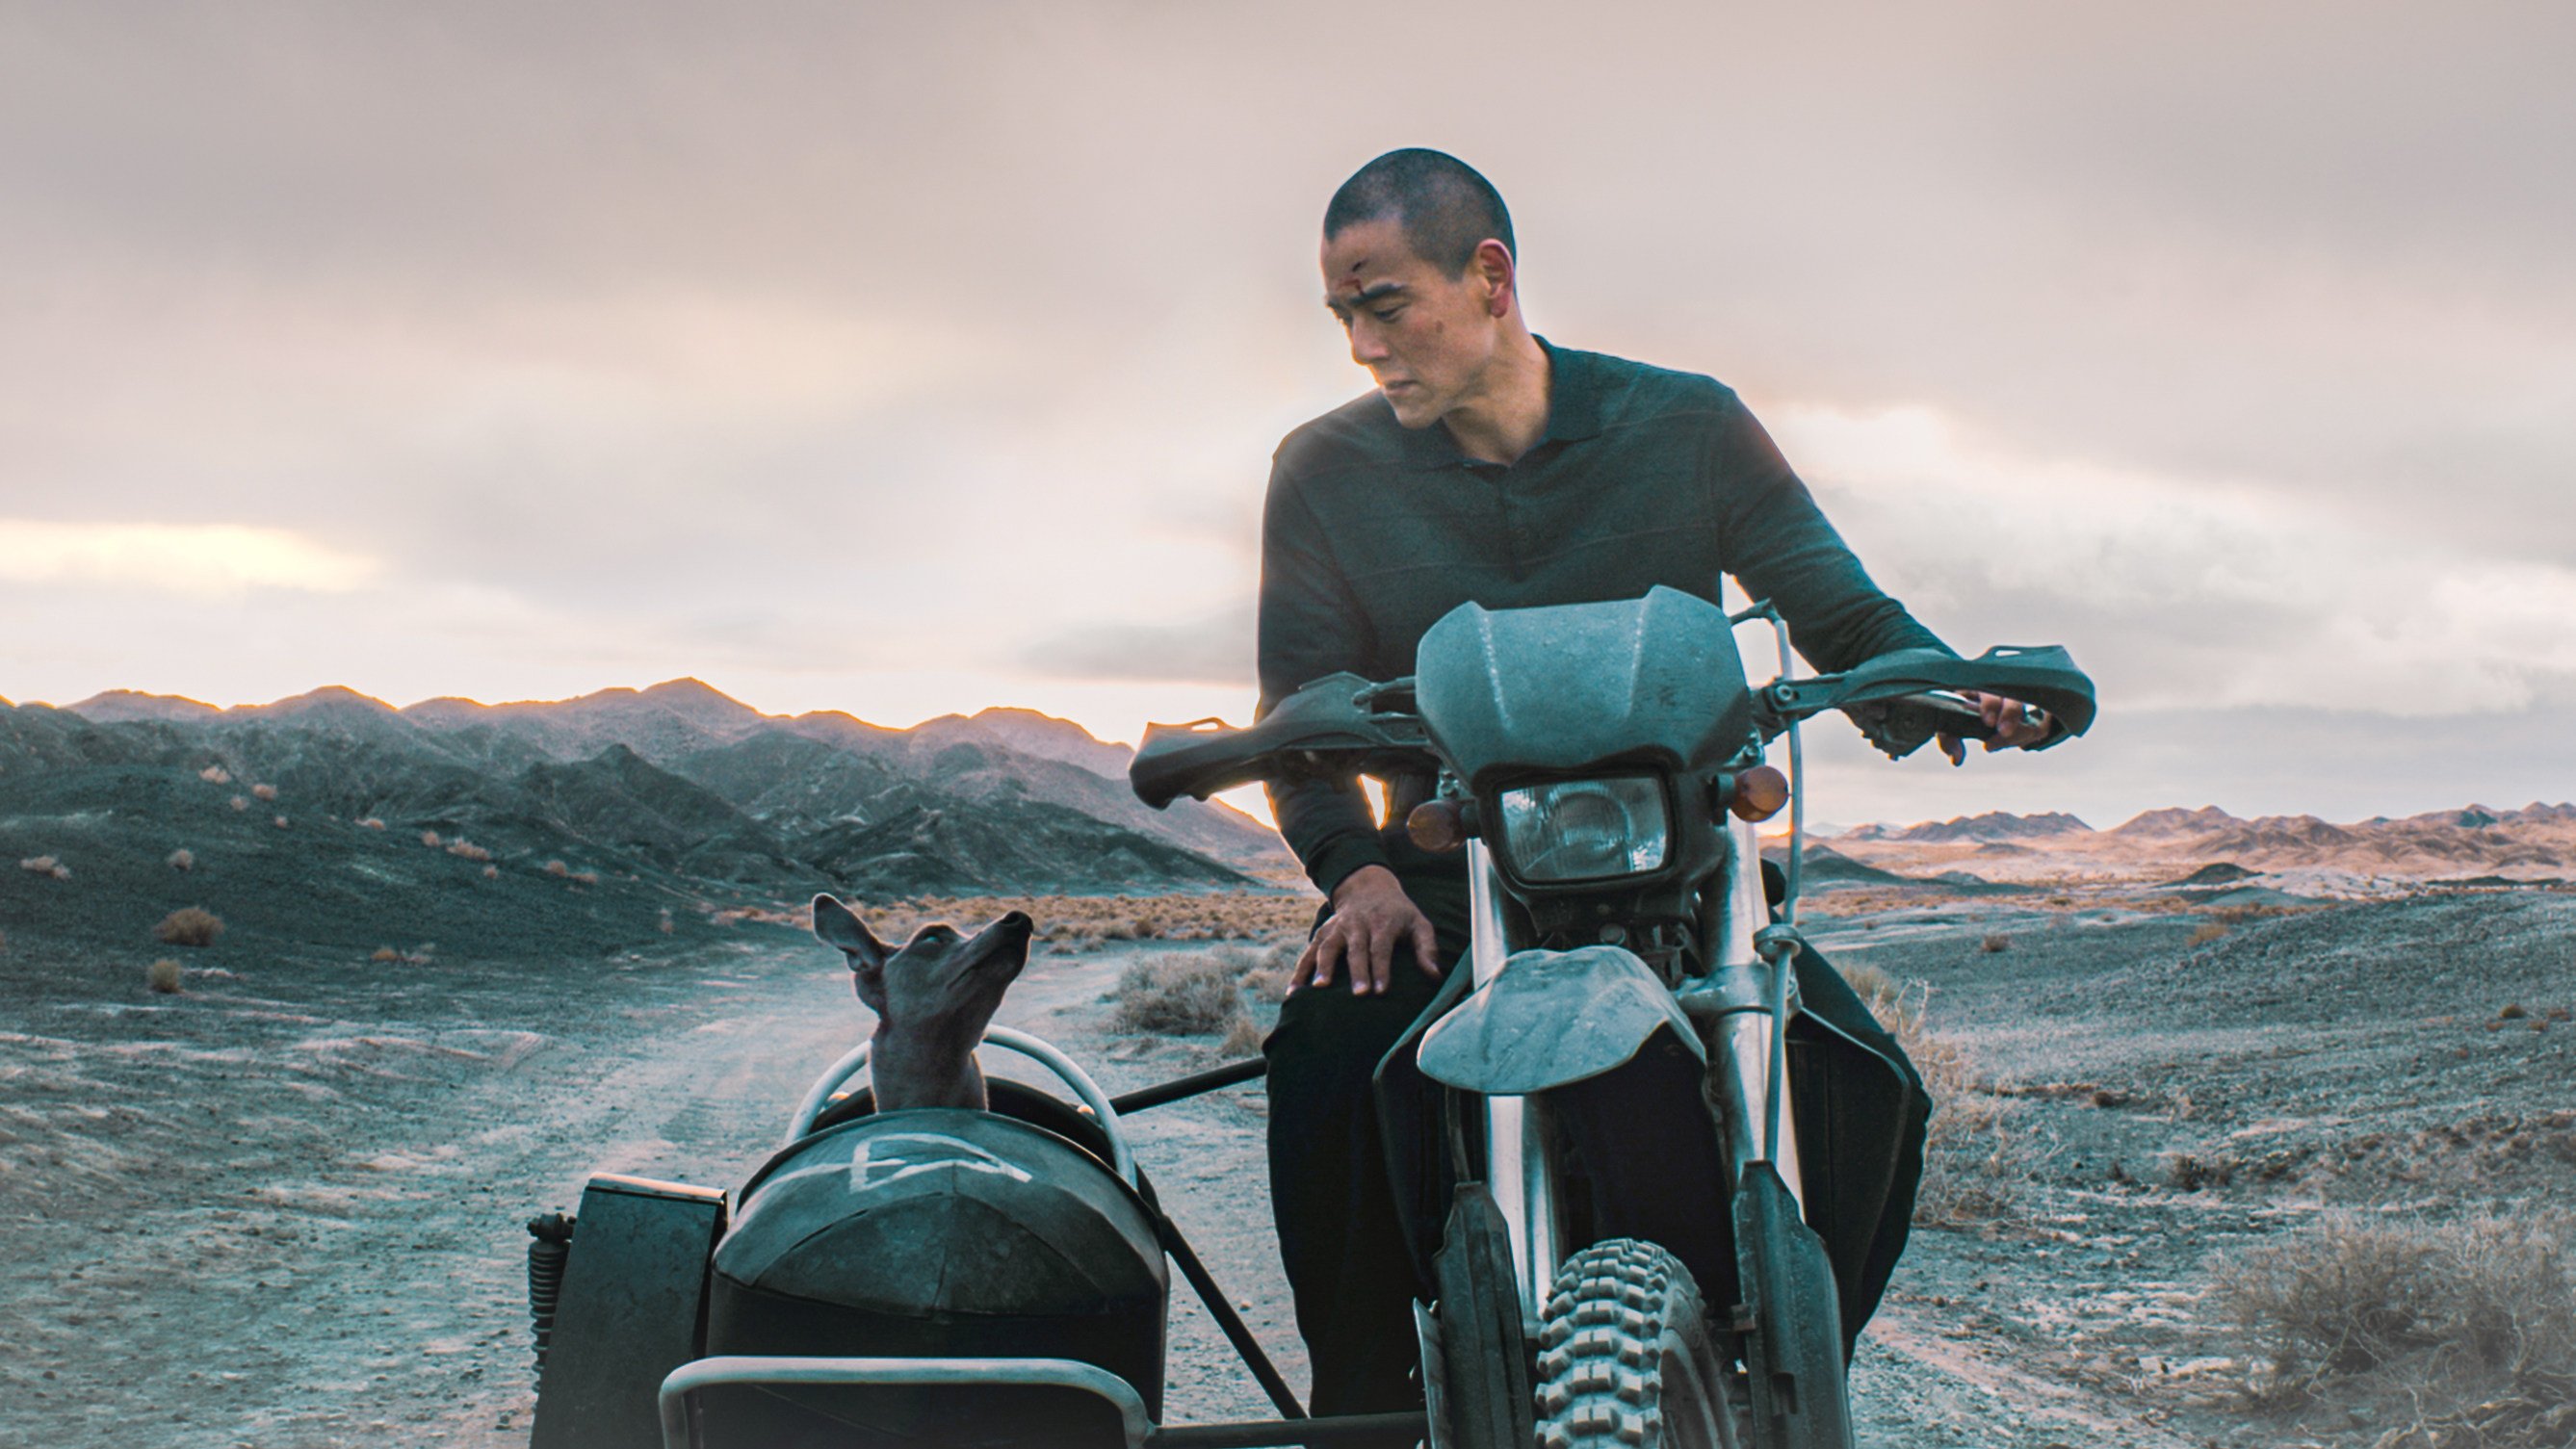 Eddie Peng as Lang in a still from Black Dog, directed by Guan Yu. Dong Liya and Jia Zhangke co-star.